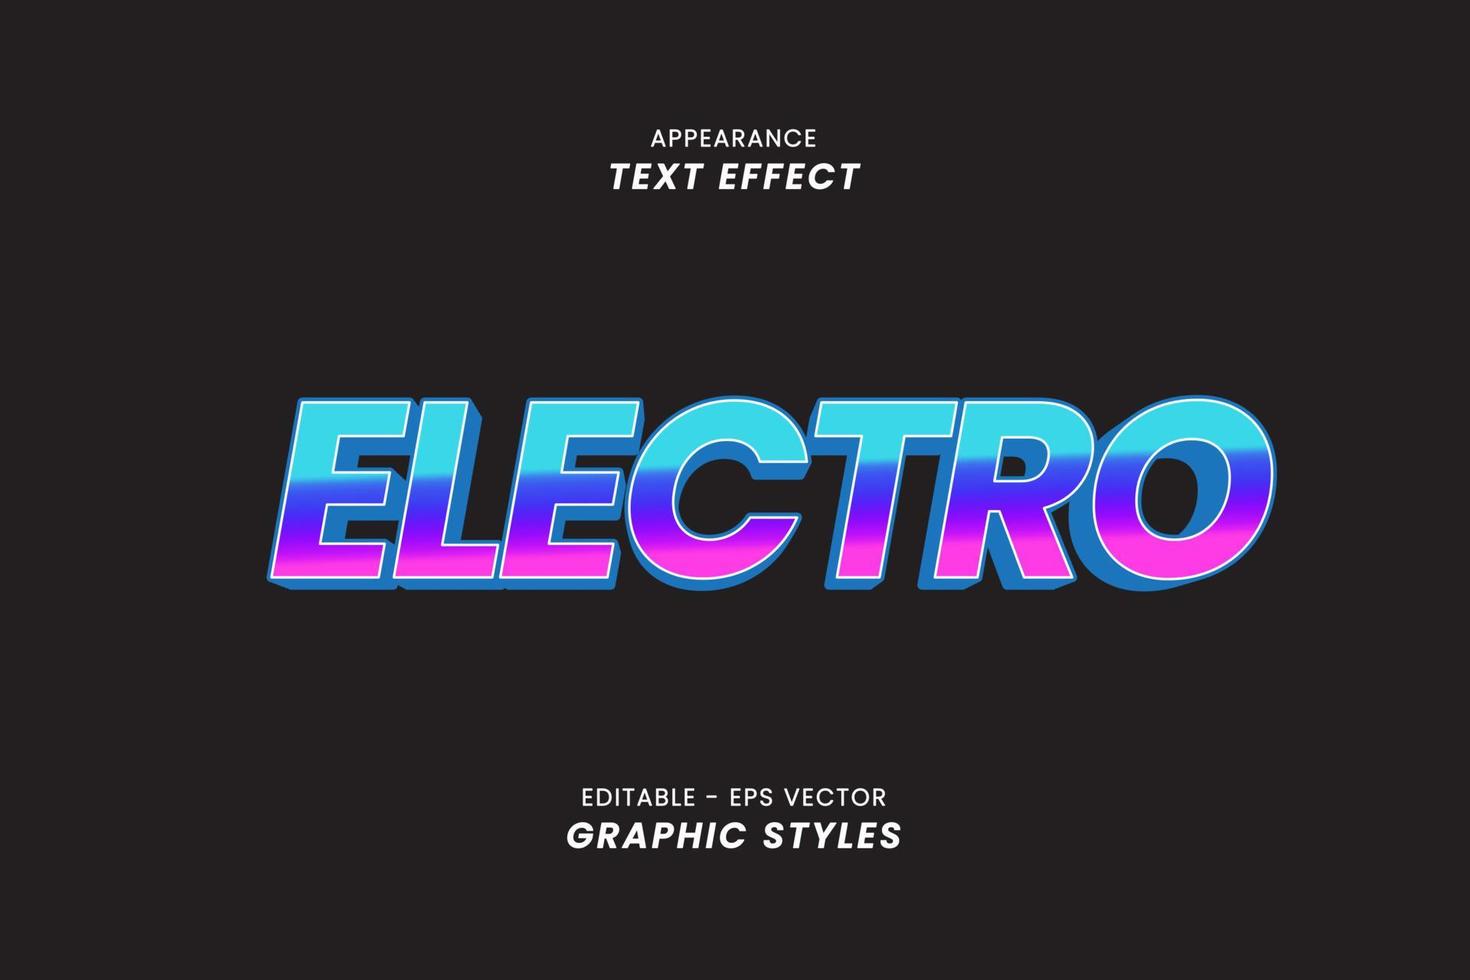 Electro Text Effect with Colorful 3D Letters. vector